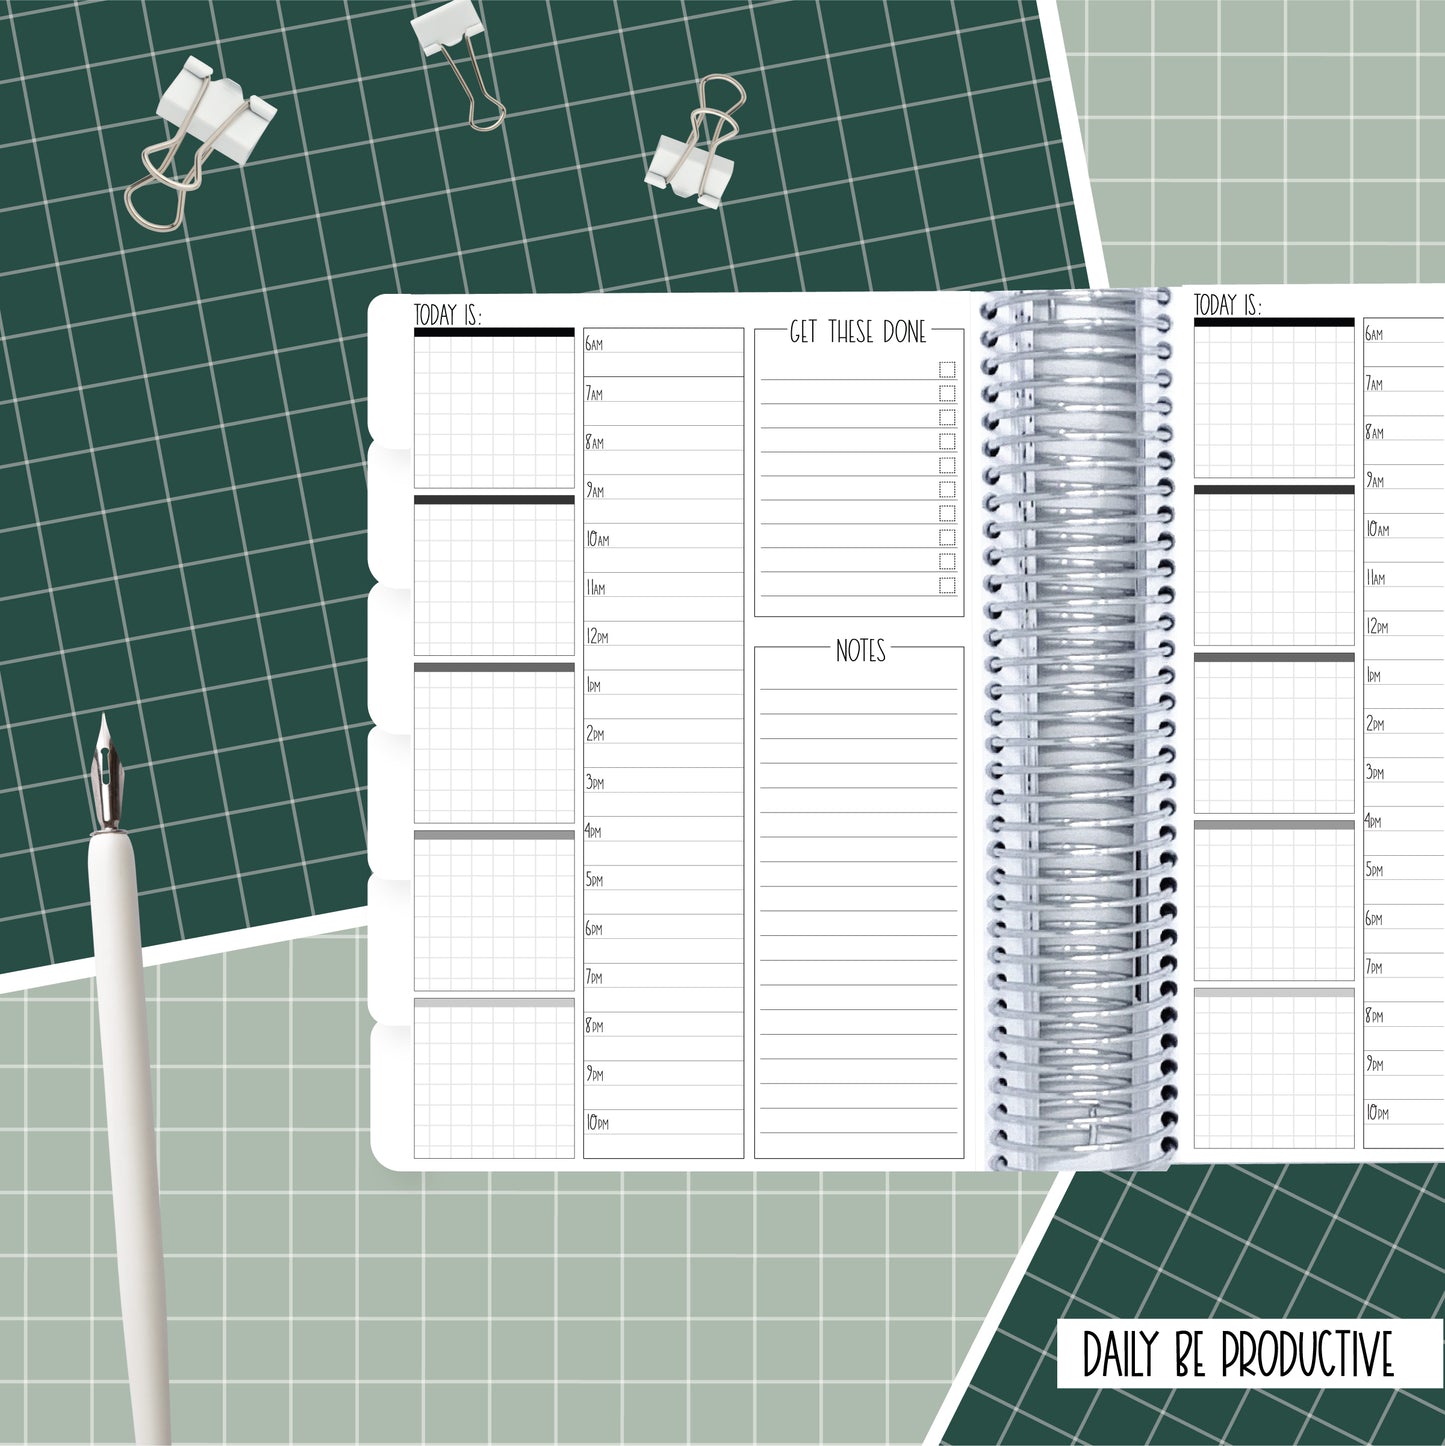 Leopard Grunge - A5 Daily Be Productive Planner